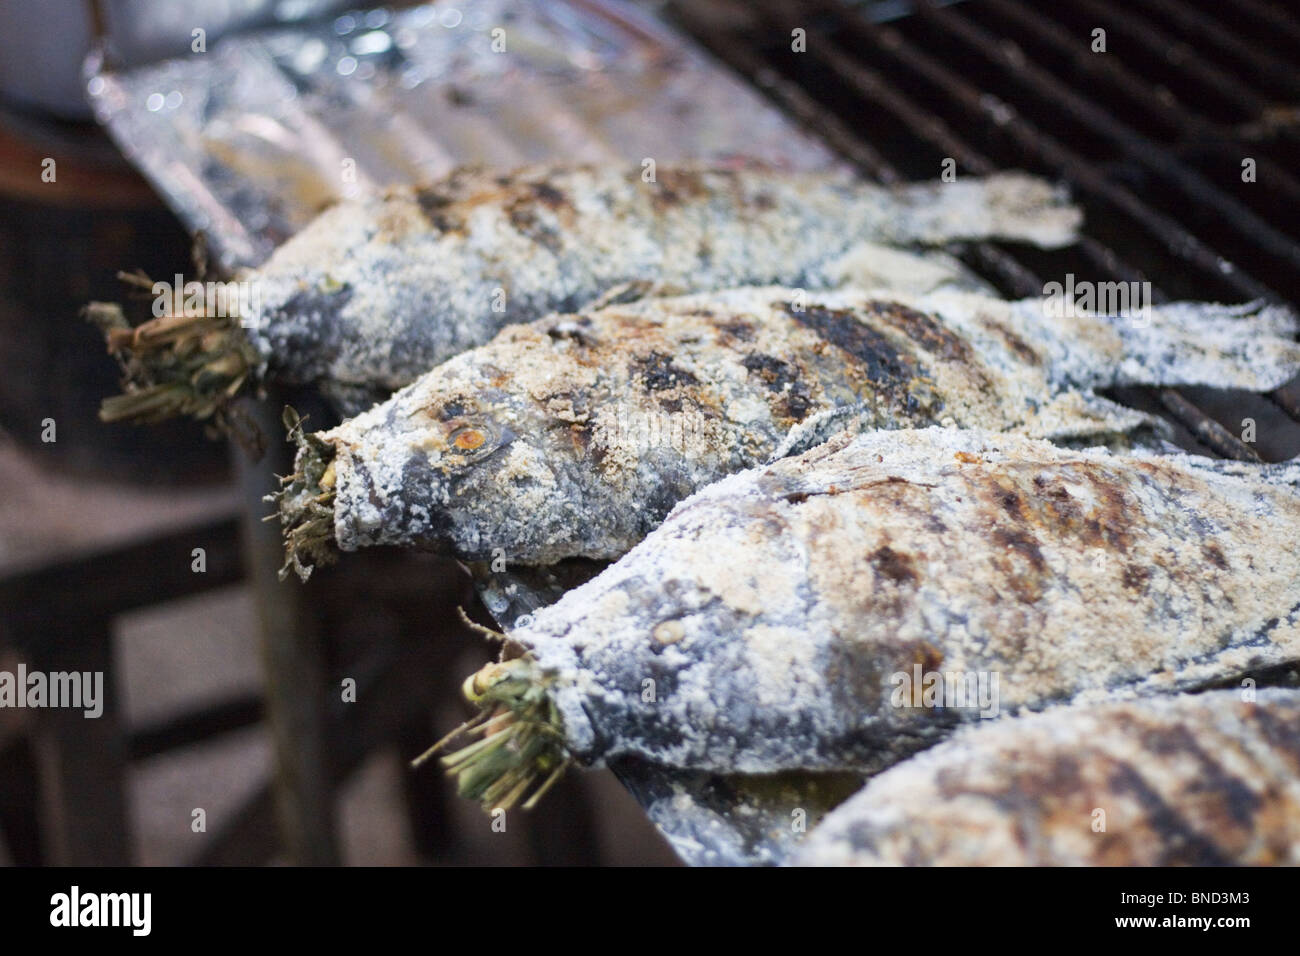 Grilled fish stuffed with lemongrass in a Thai food market, Nong Khai, Thailand Stock Photo